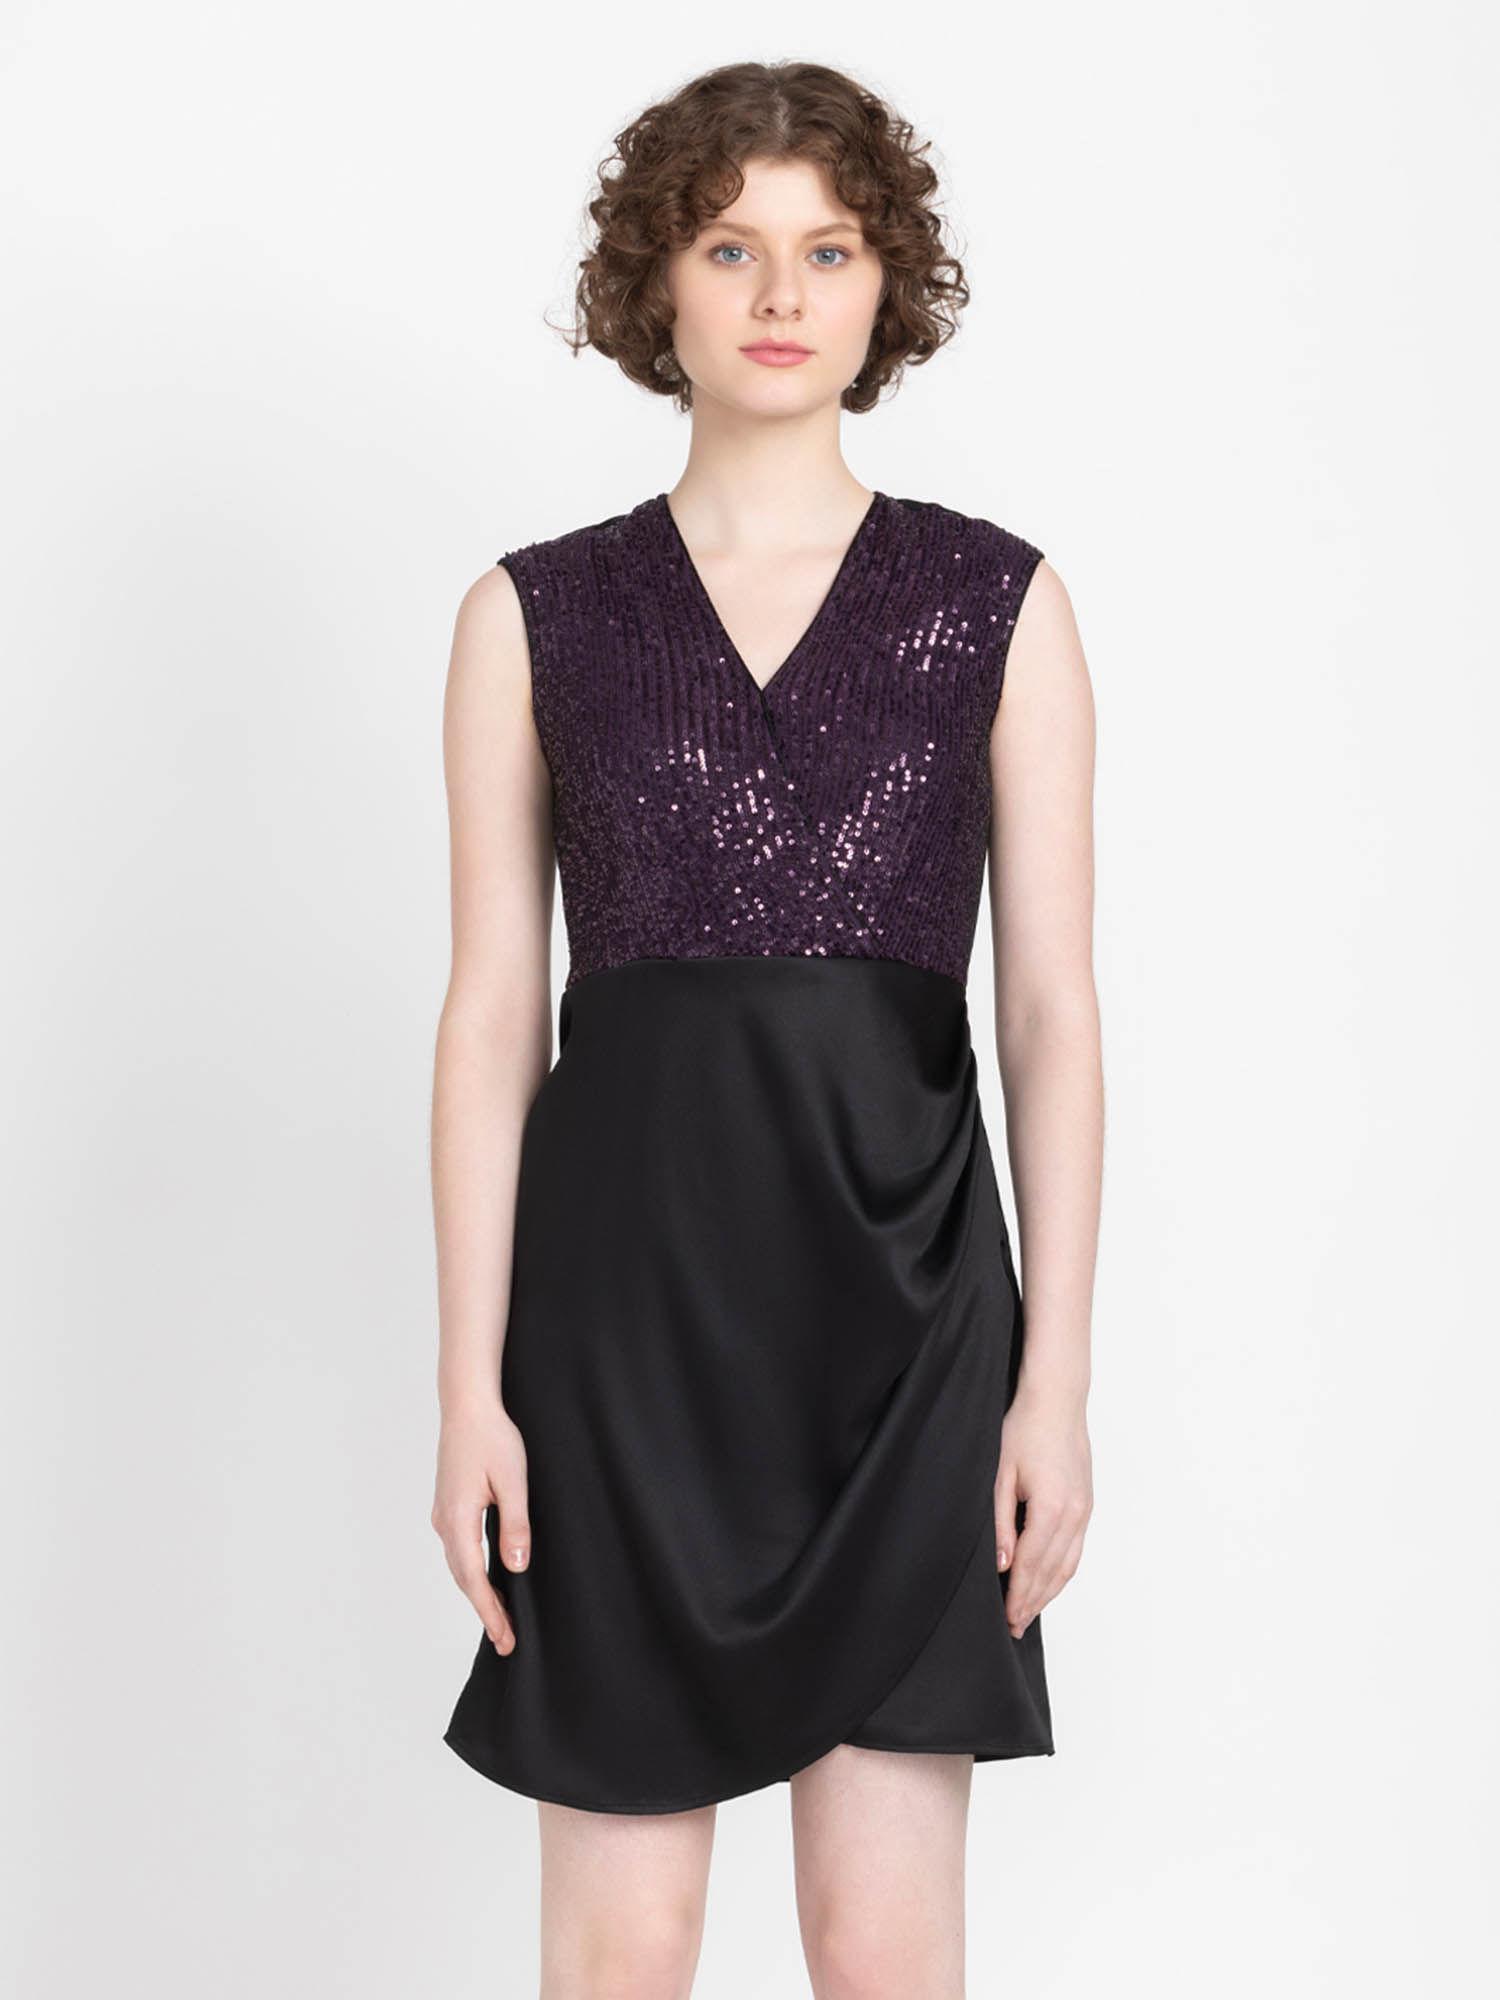 v-neck purple solid sleeveless party dress for women